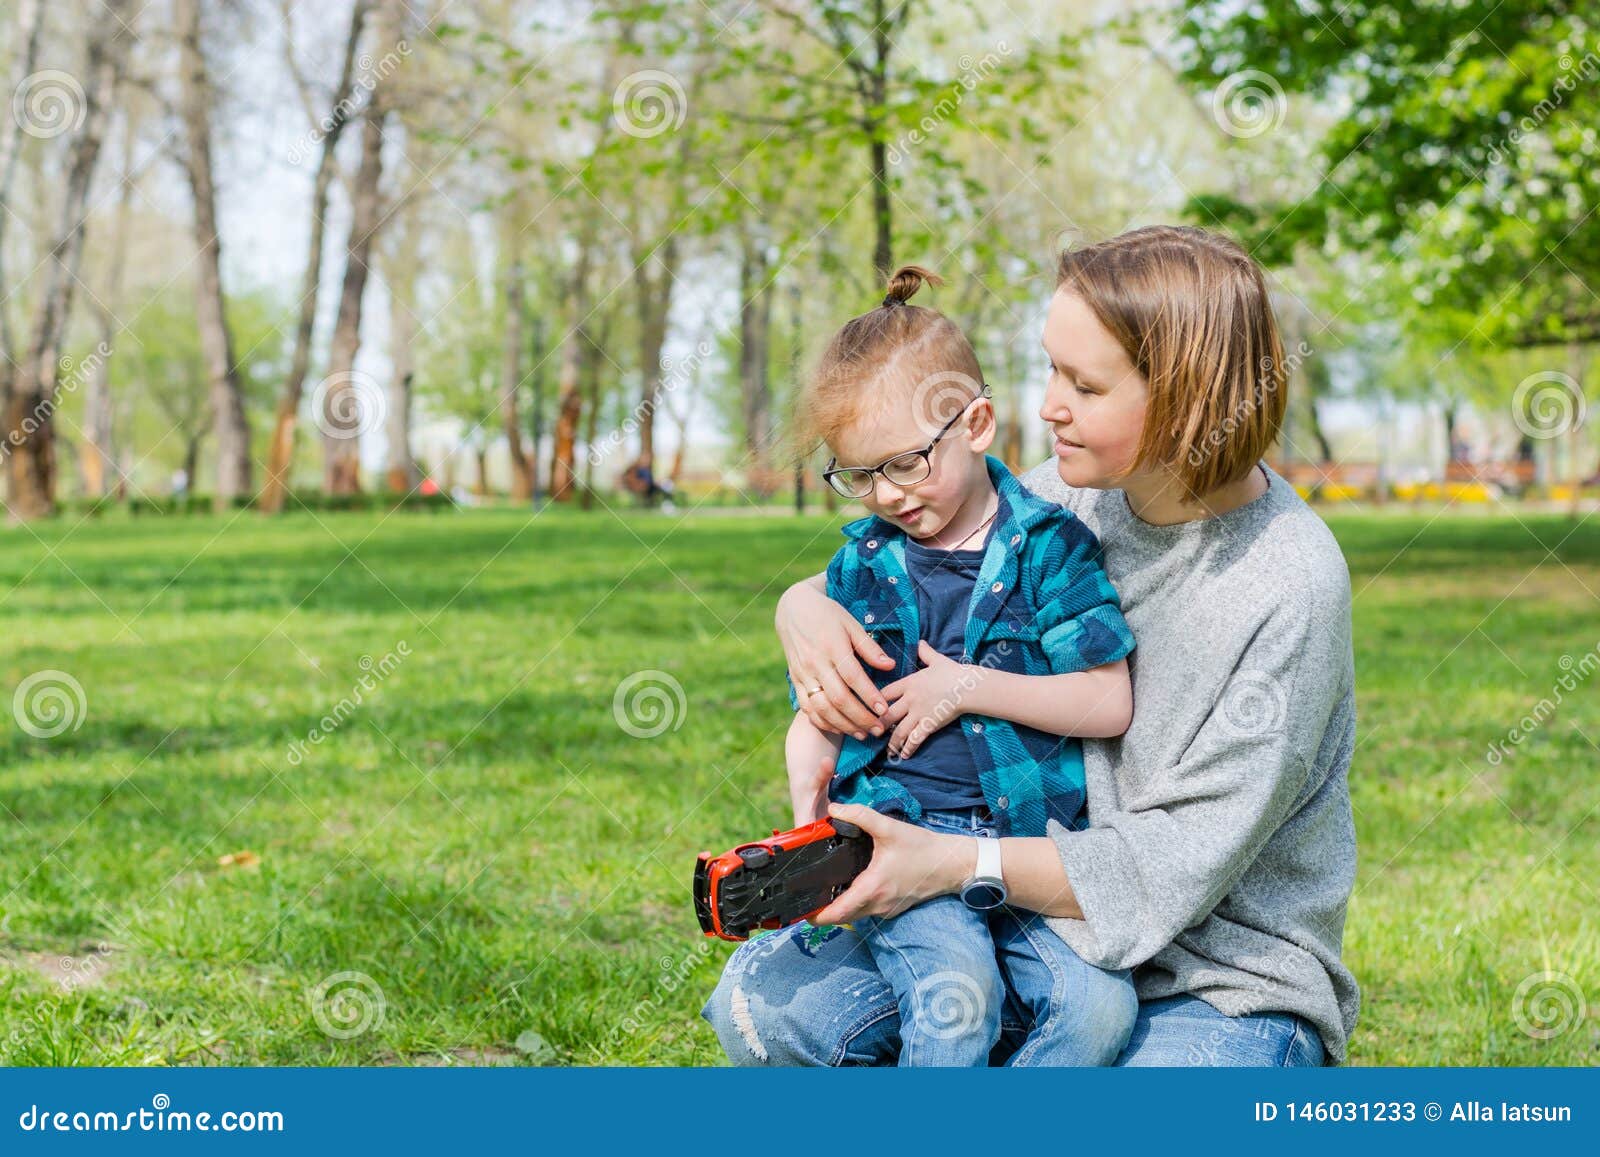 A Little Boy And His Mom Play With A Toy Car In The Park In Spring